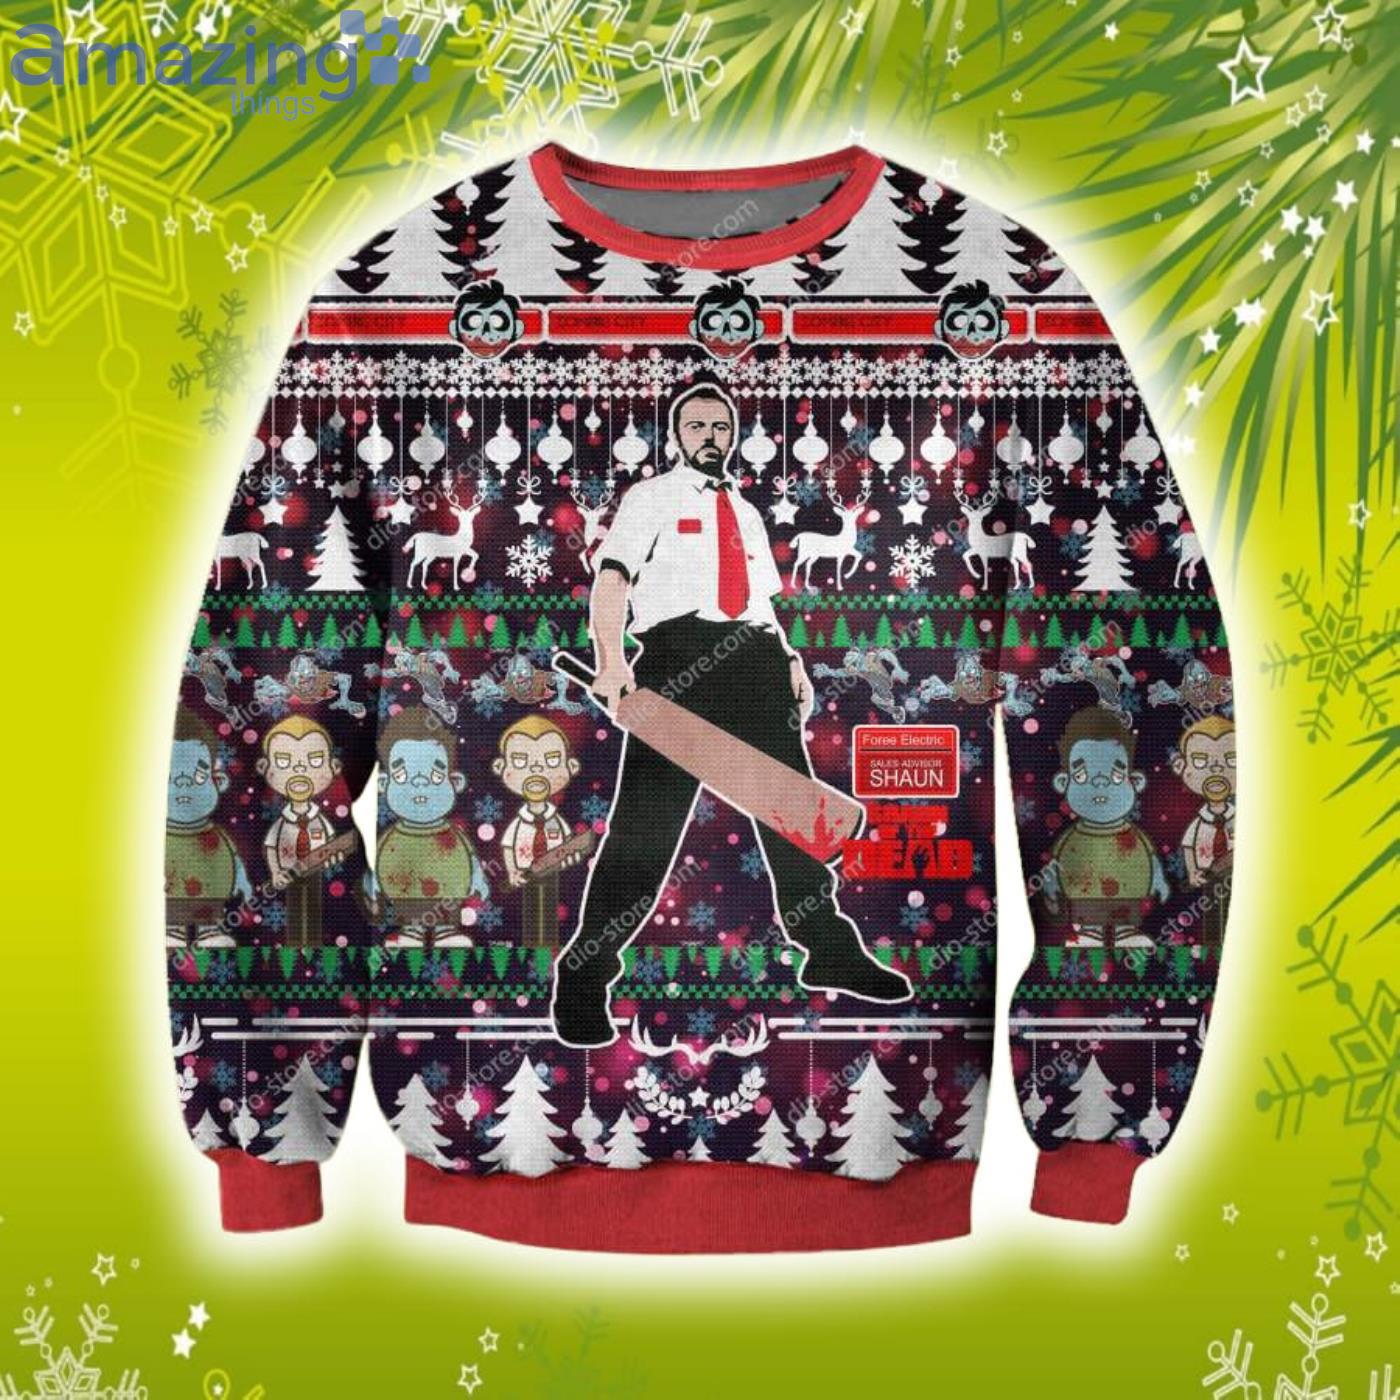 Shaun Of The Dead Horror Film 2004 3D Christmas Knitting Pattern Ugly Sweater Sweatshirt Product Photo 1